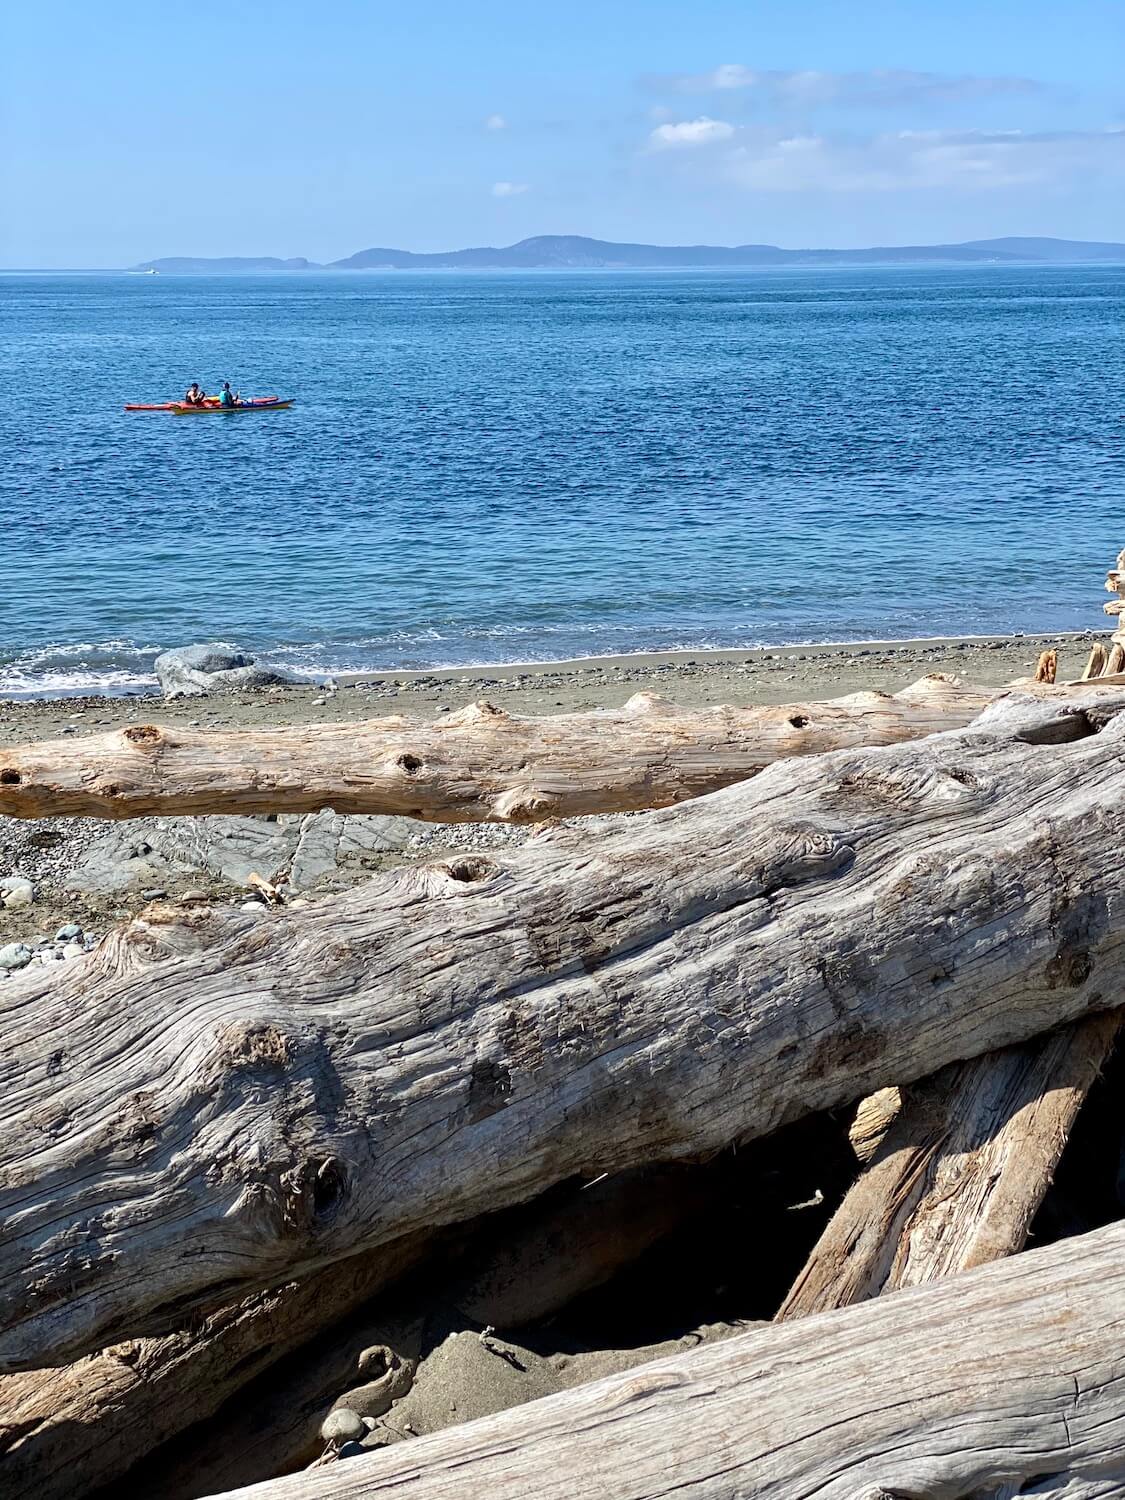 Two kayakers paddle in the waters off the coast of Deception Pass State Park. The beach is full of drift logs and lightly lapping waves while the background features the San Juan Islands under blue skies.